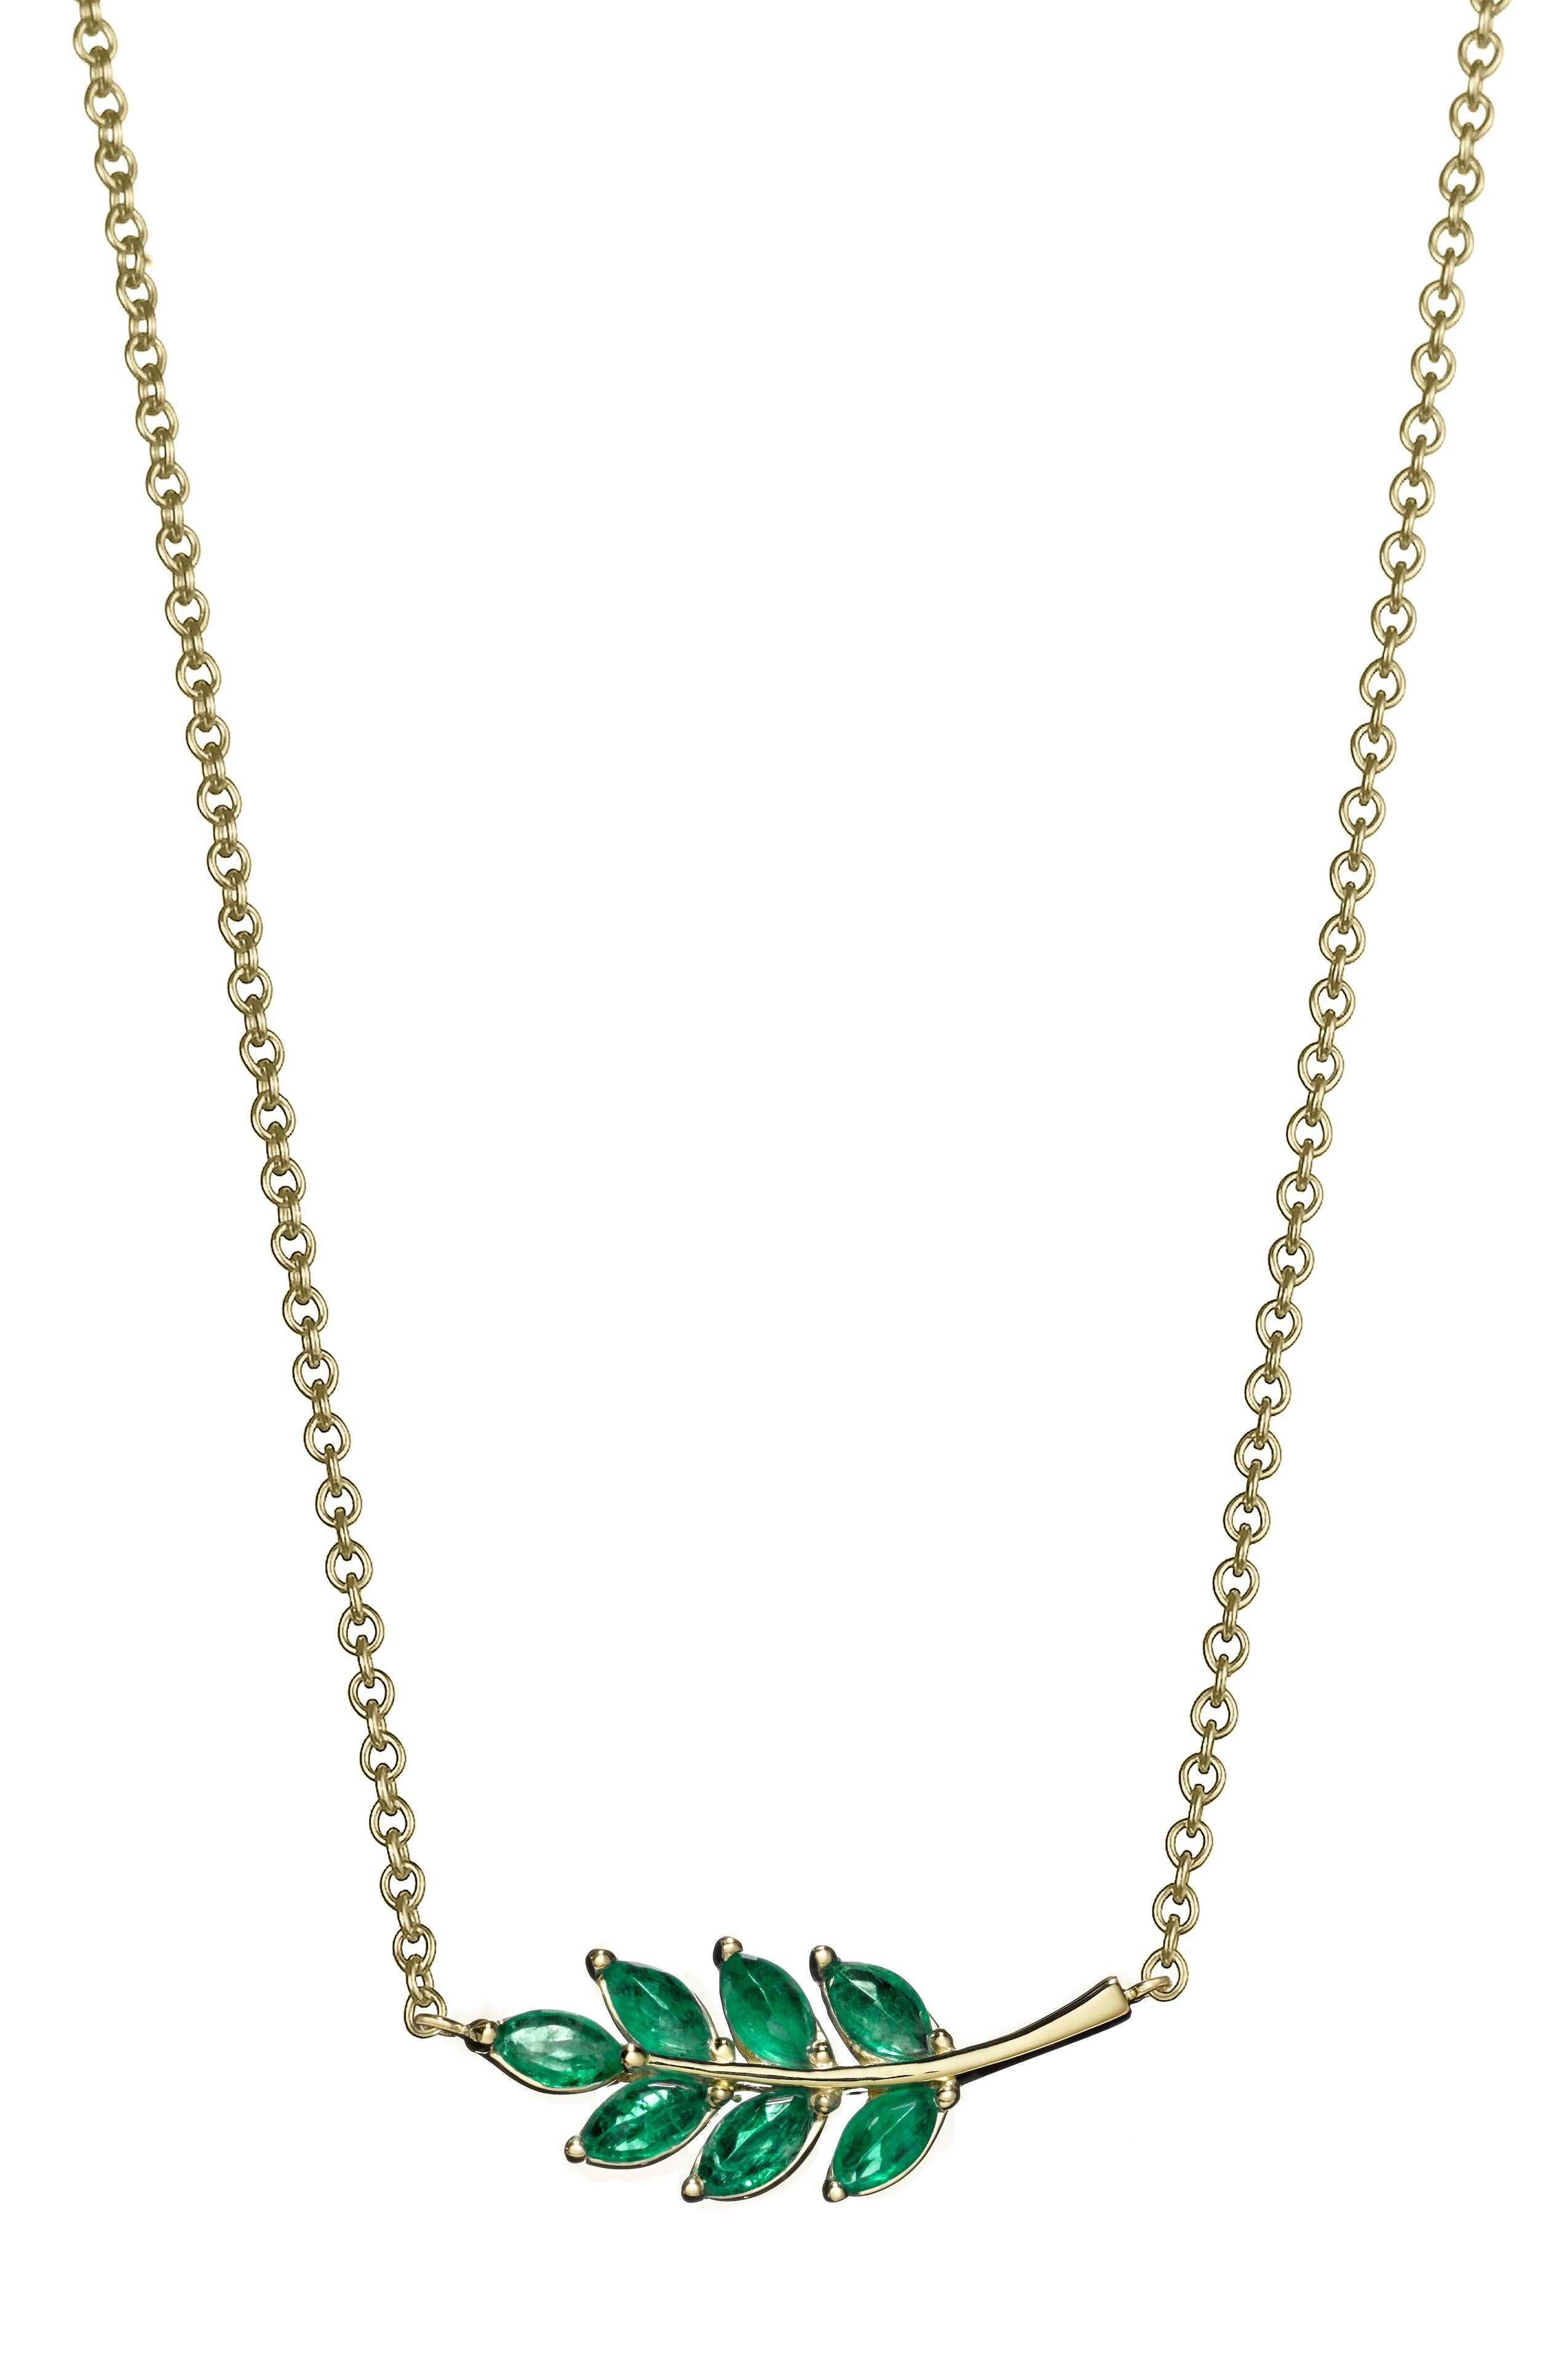 .92 Carat Emerald Leaf Necklace
A colorful and pretty necklace. The branch is slightly curved and each leaf is a marquise diamond set upside down to give it a domed look.


Emerald Leaf Necklace
A colorful and pretty necklace. The branch is slightly